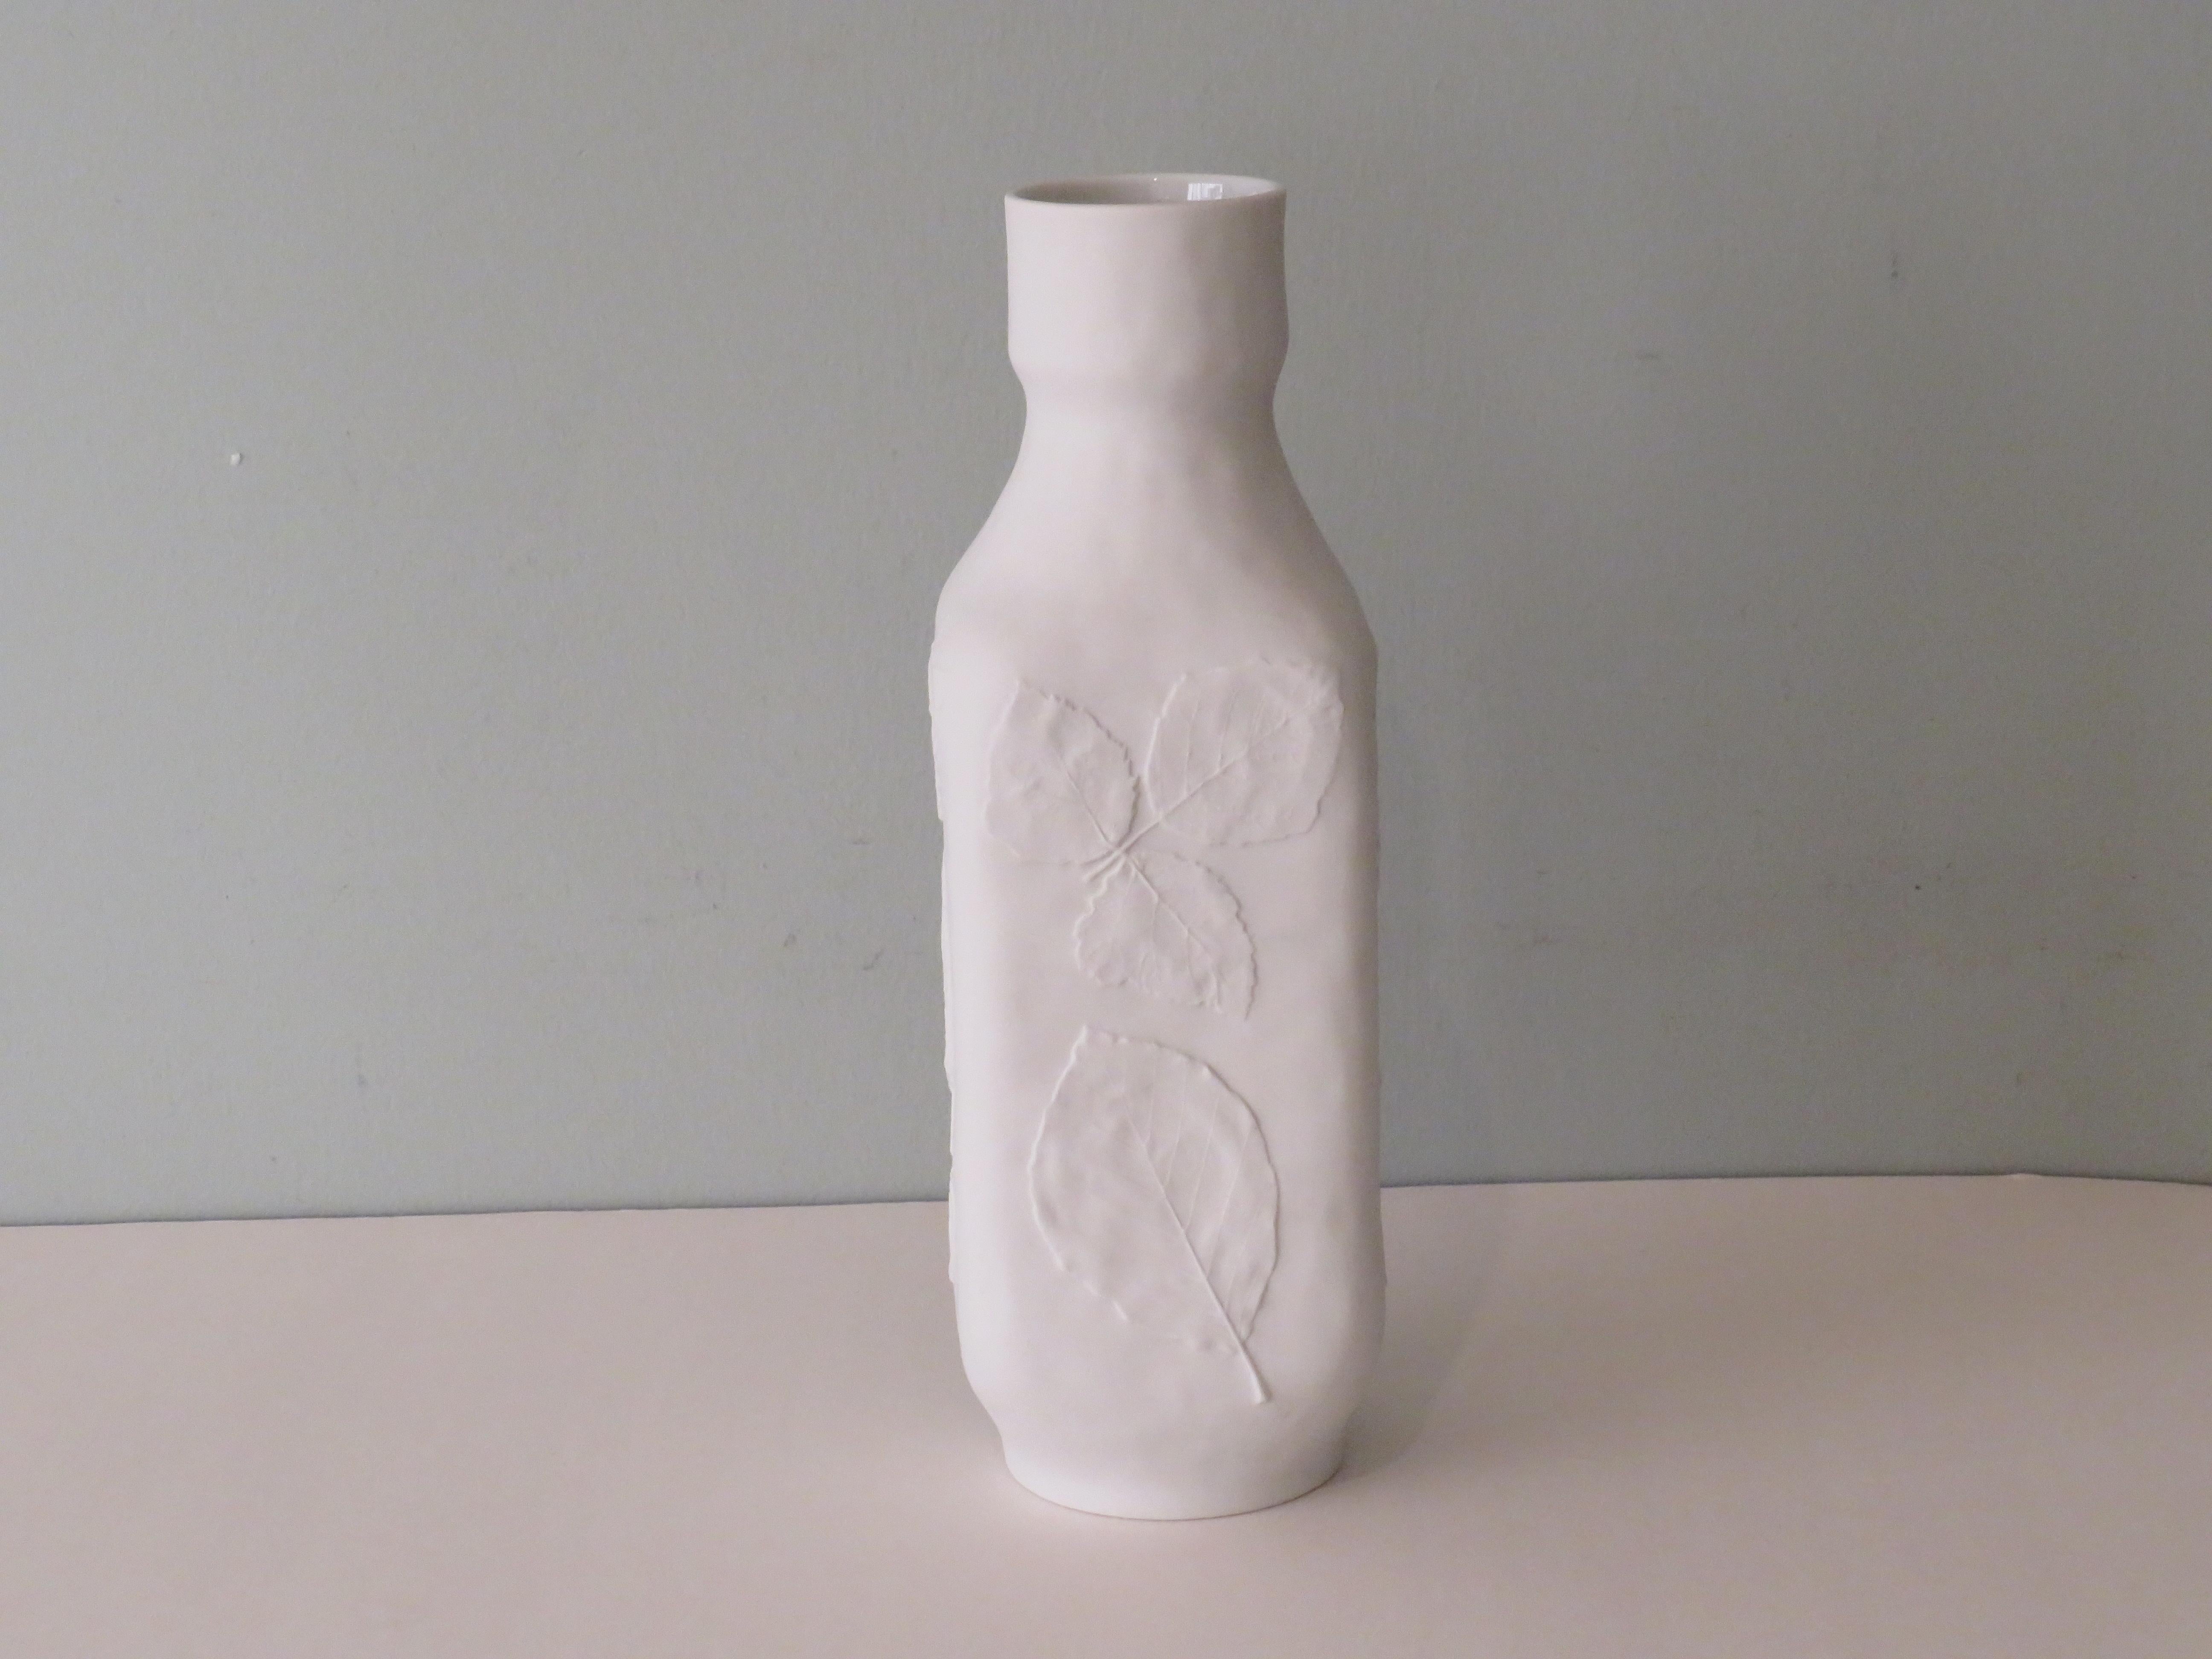 White Biscuit Vase with Floral Embossed Motif, Hutschenreuther, Germany, 1970s For Sale 4